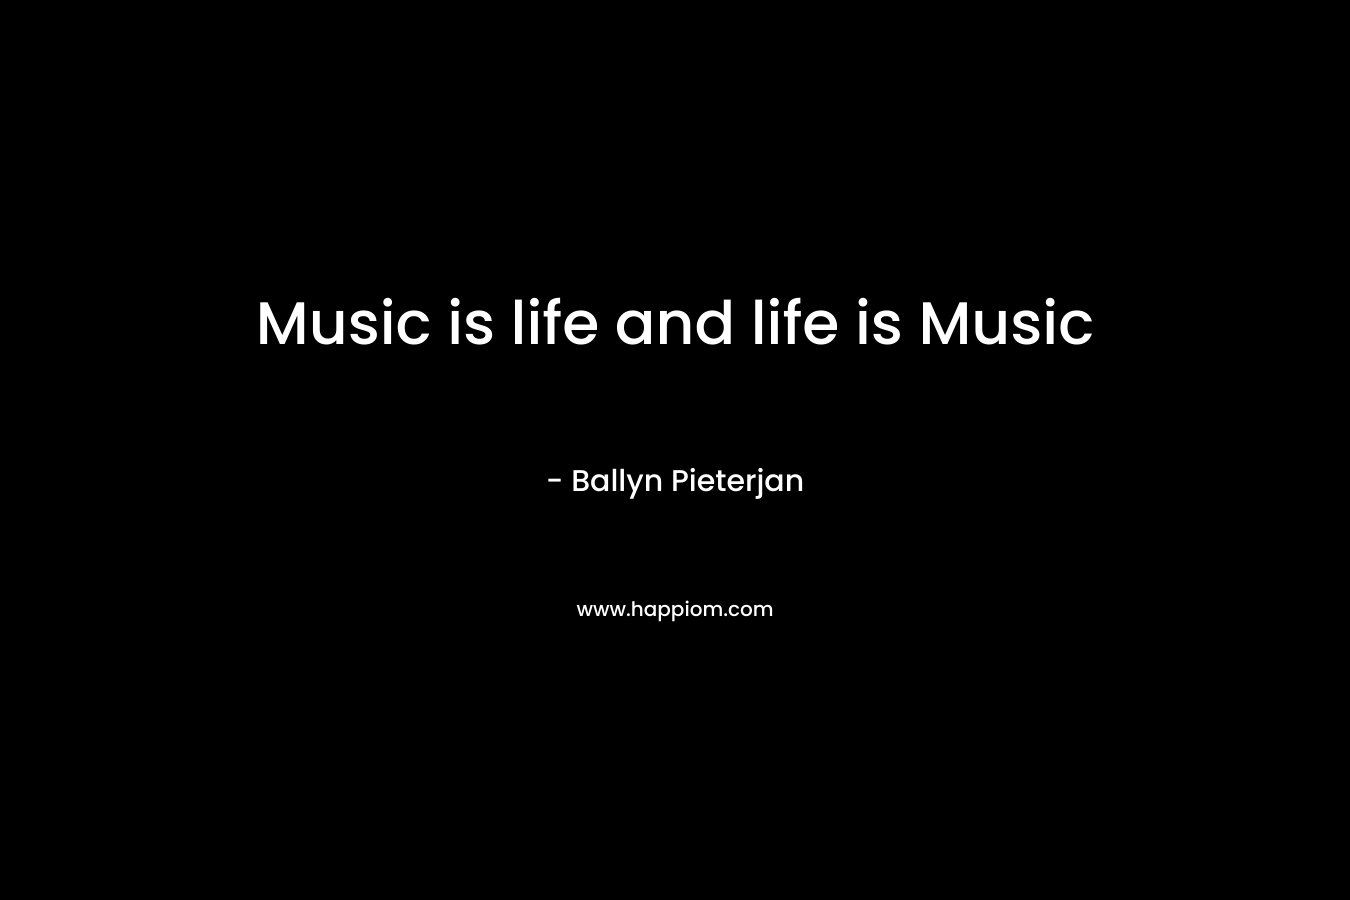 Music is life and life is Music